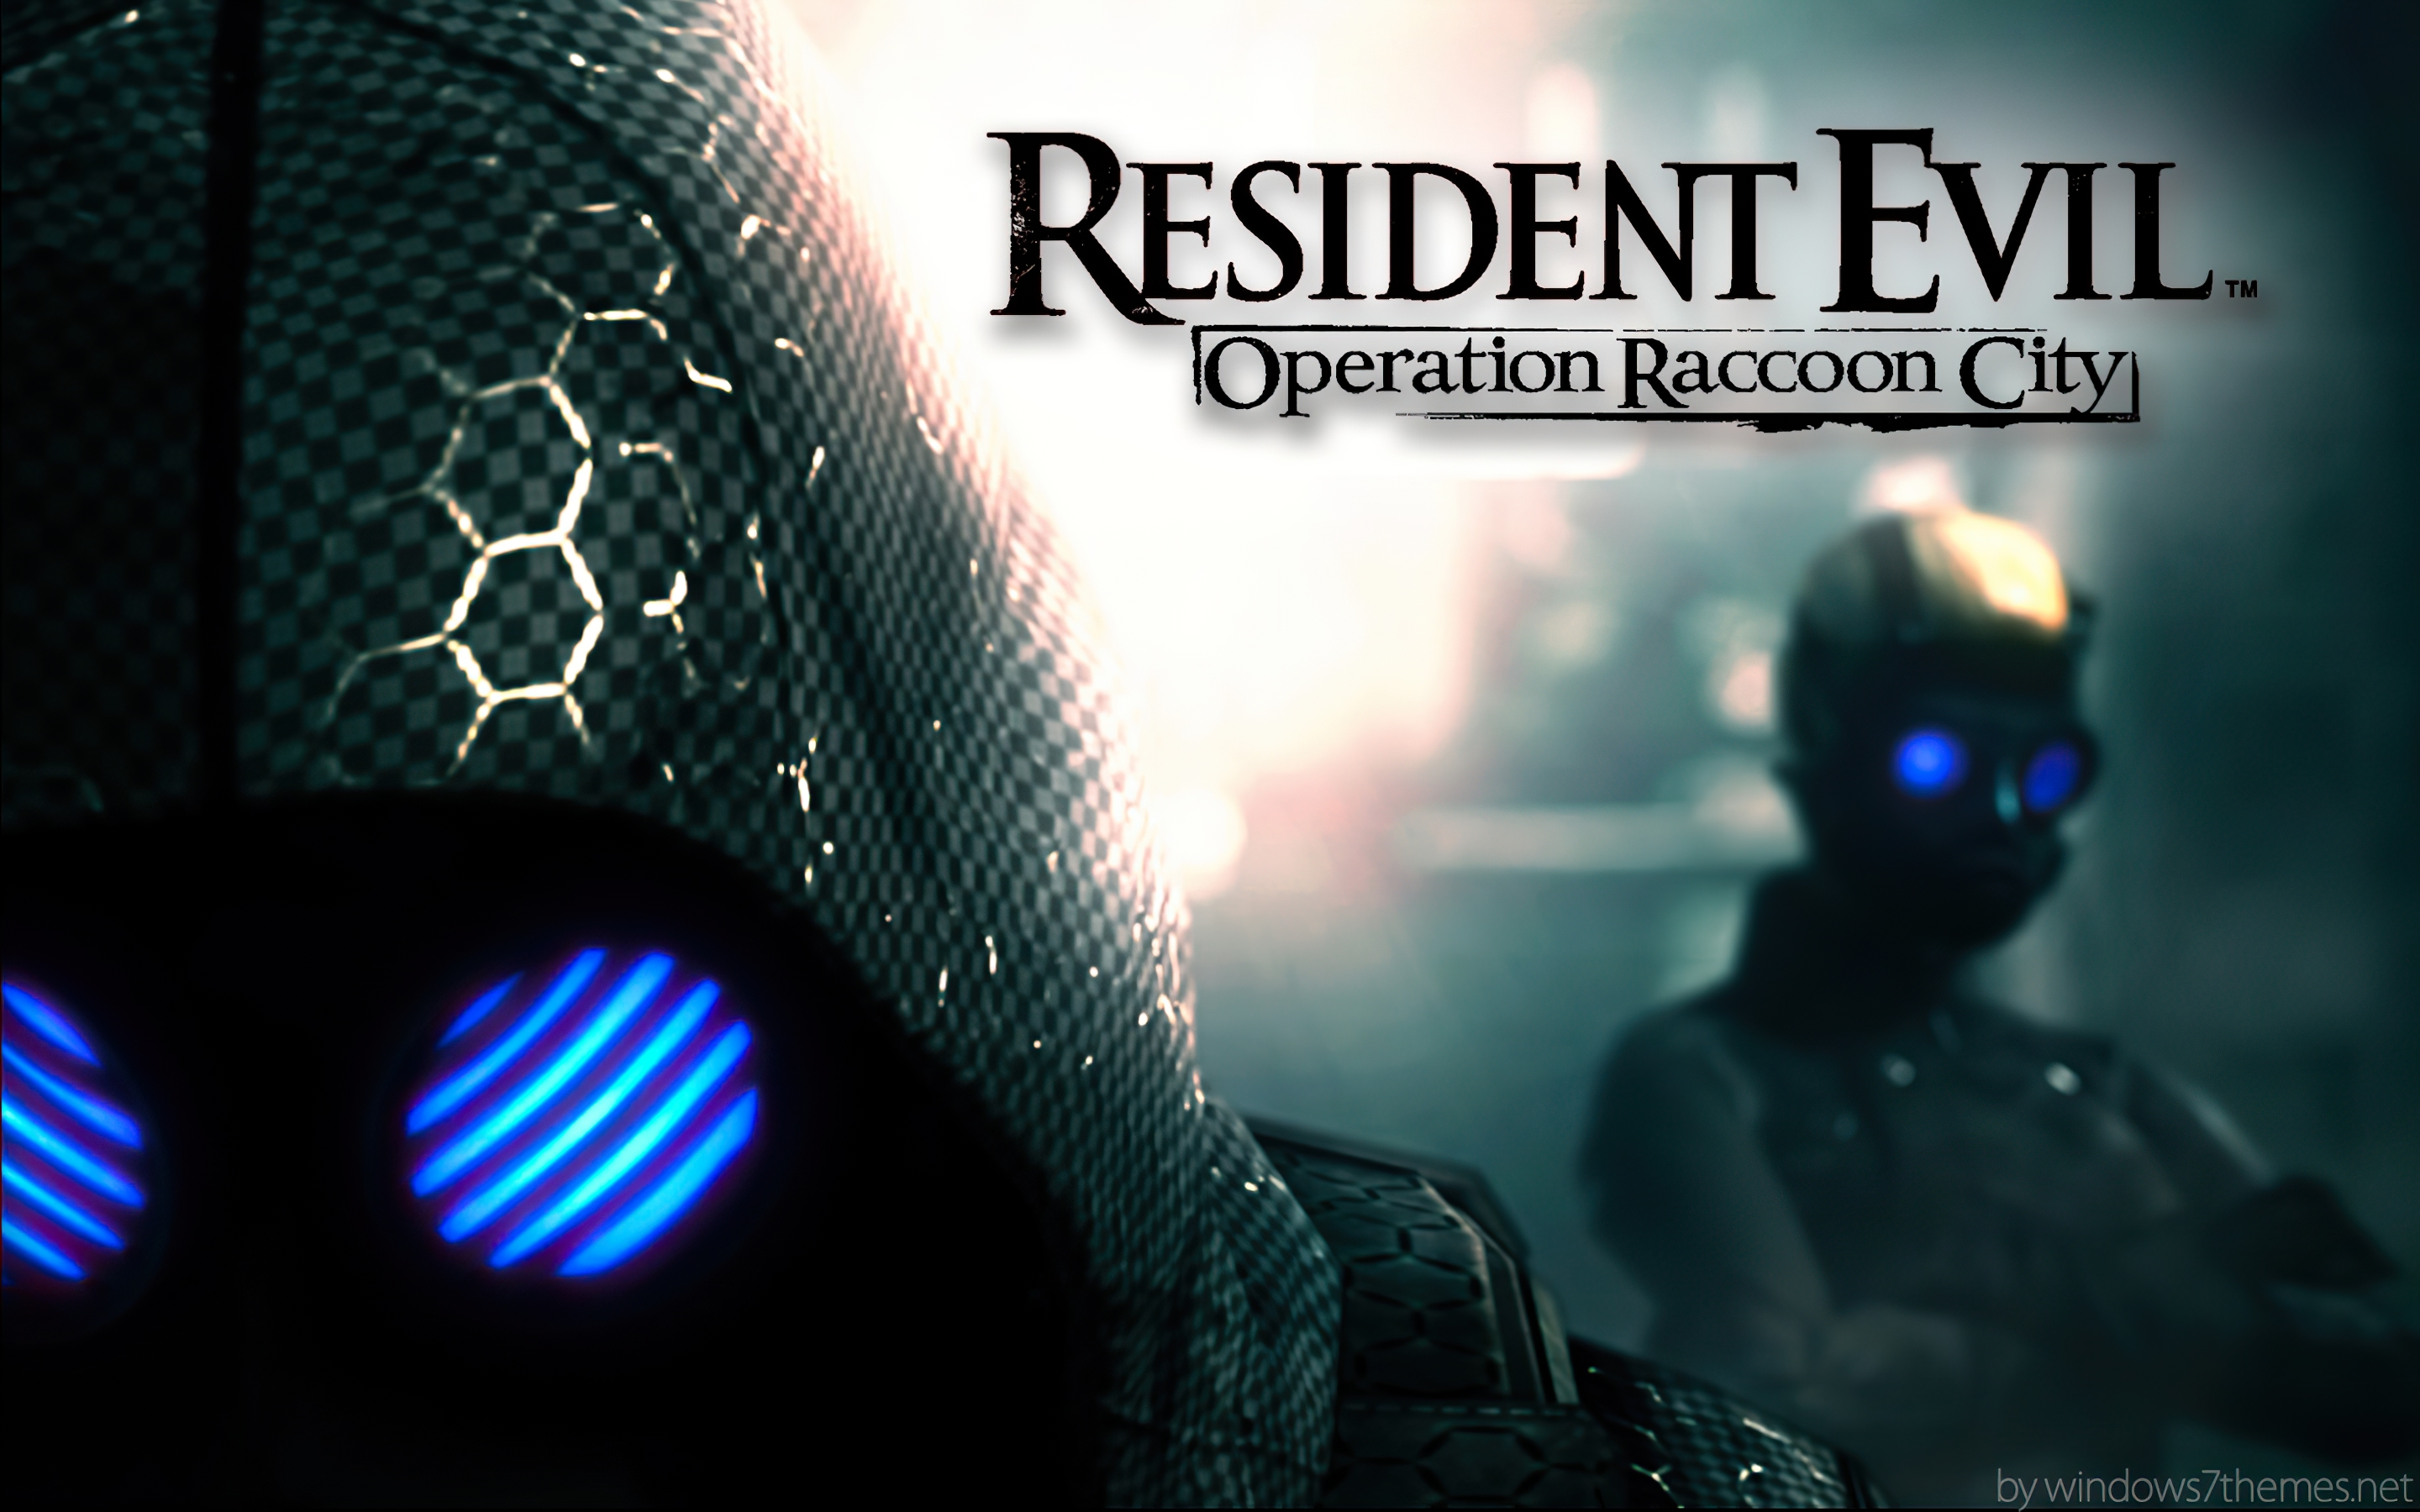 Video Game Resident Evil: Operation Raccoon City HD Wallpaper | Background Image